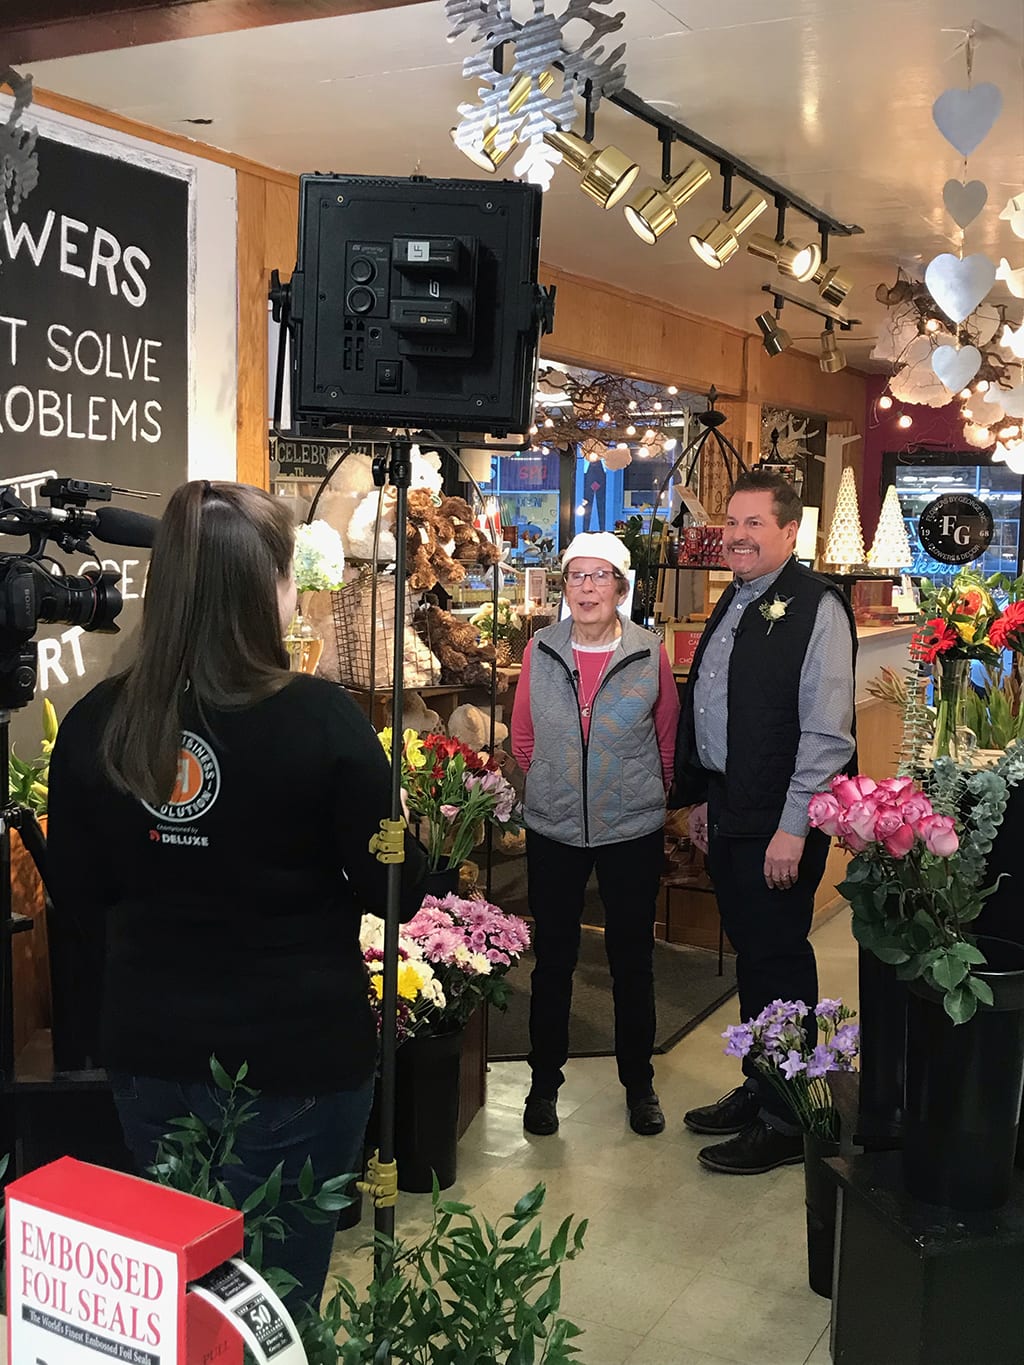 Small Business Revolution, a Hulu television program, has selected Arlington, Washington, as a finalist city for its fourth season. Its hosts recently interviewed the Flowers by George team, including SAF member David Boulton, AAF, PFCI, and his mother, Annalee.